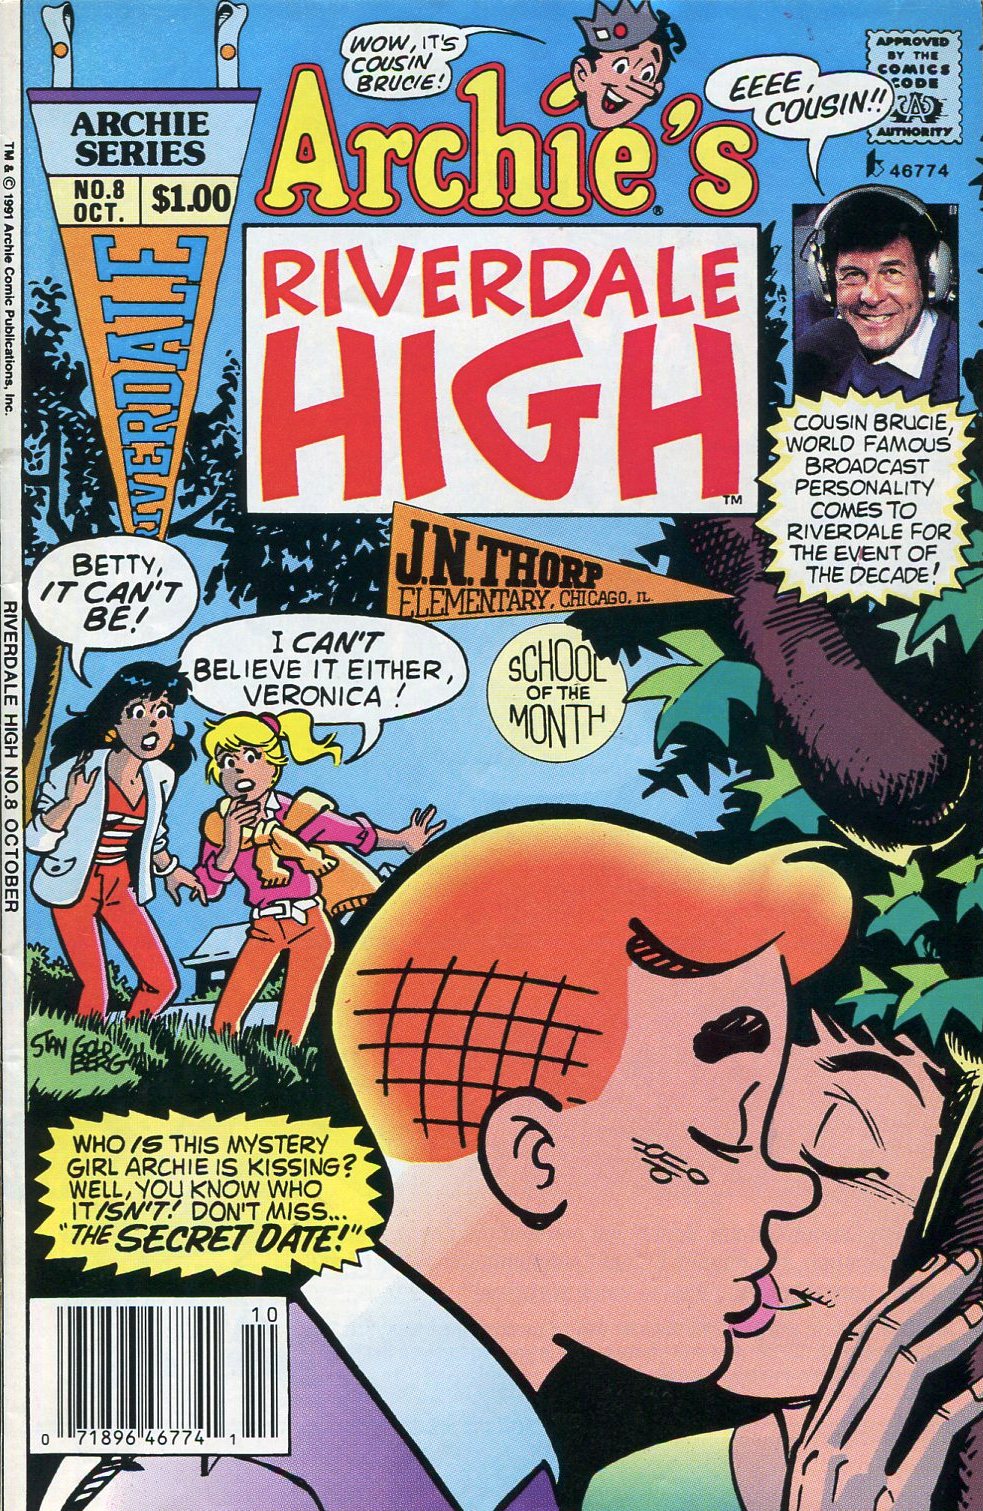 Read online Archie's Riverdale High comic -  Issue #8 - 1